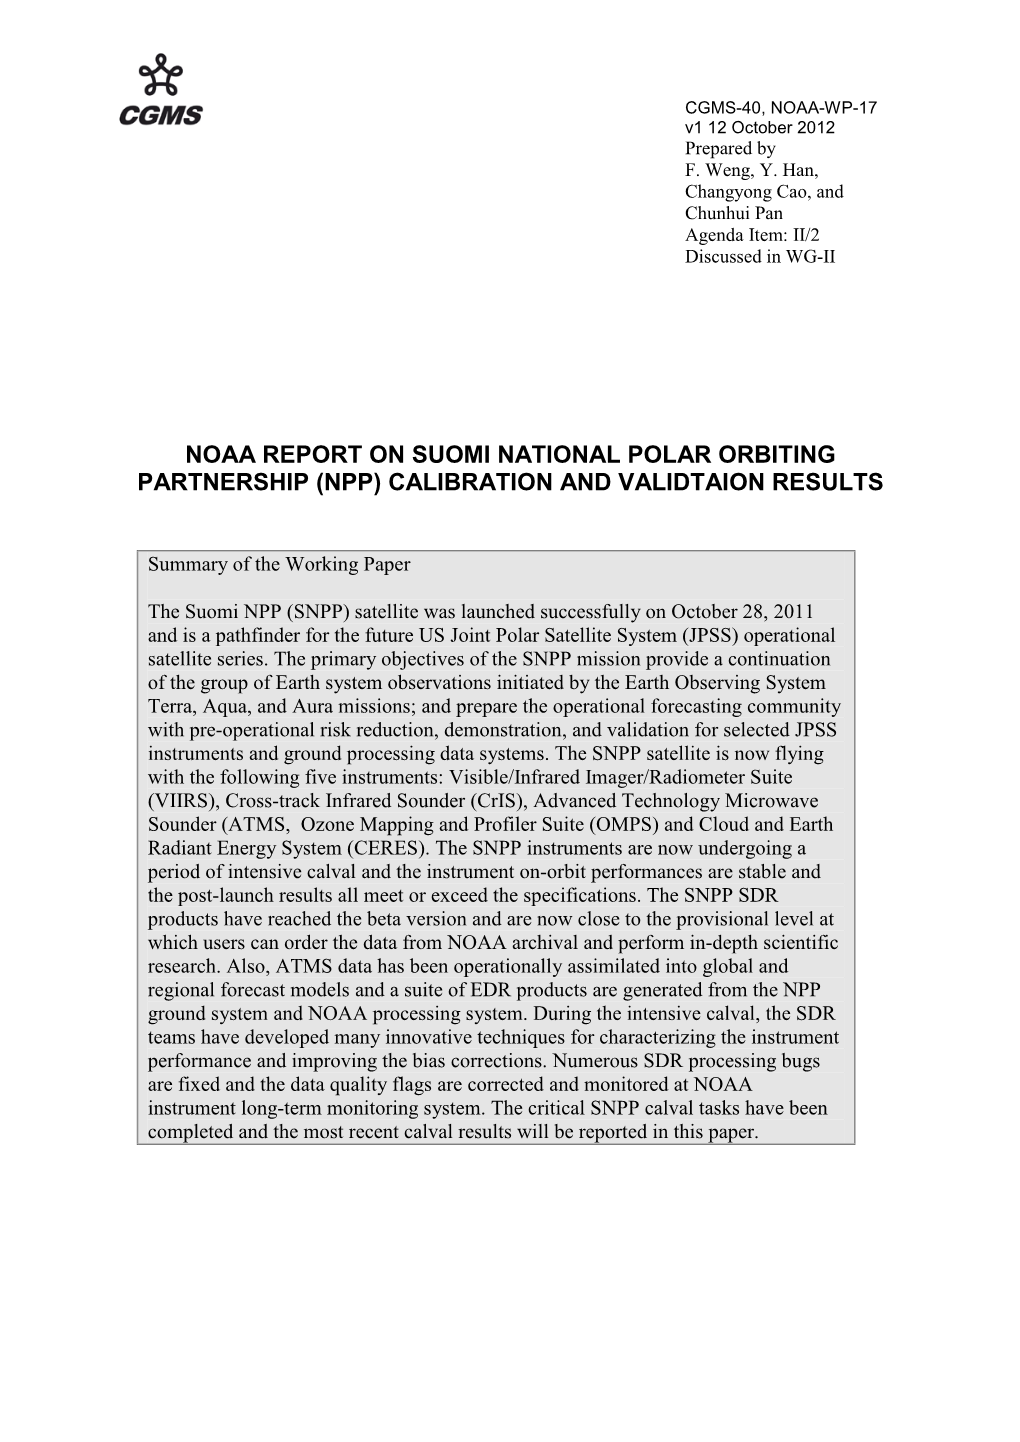 Noaa Report on Suomi National Polar Orbiting Partnership (Npp) Calibration and Validtaion Results